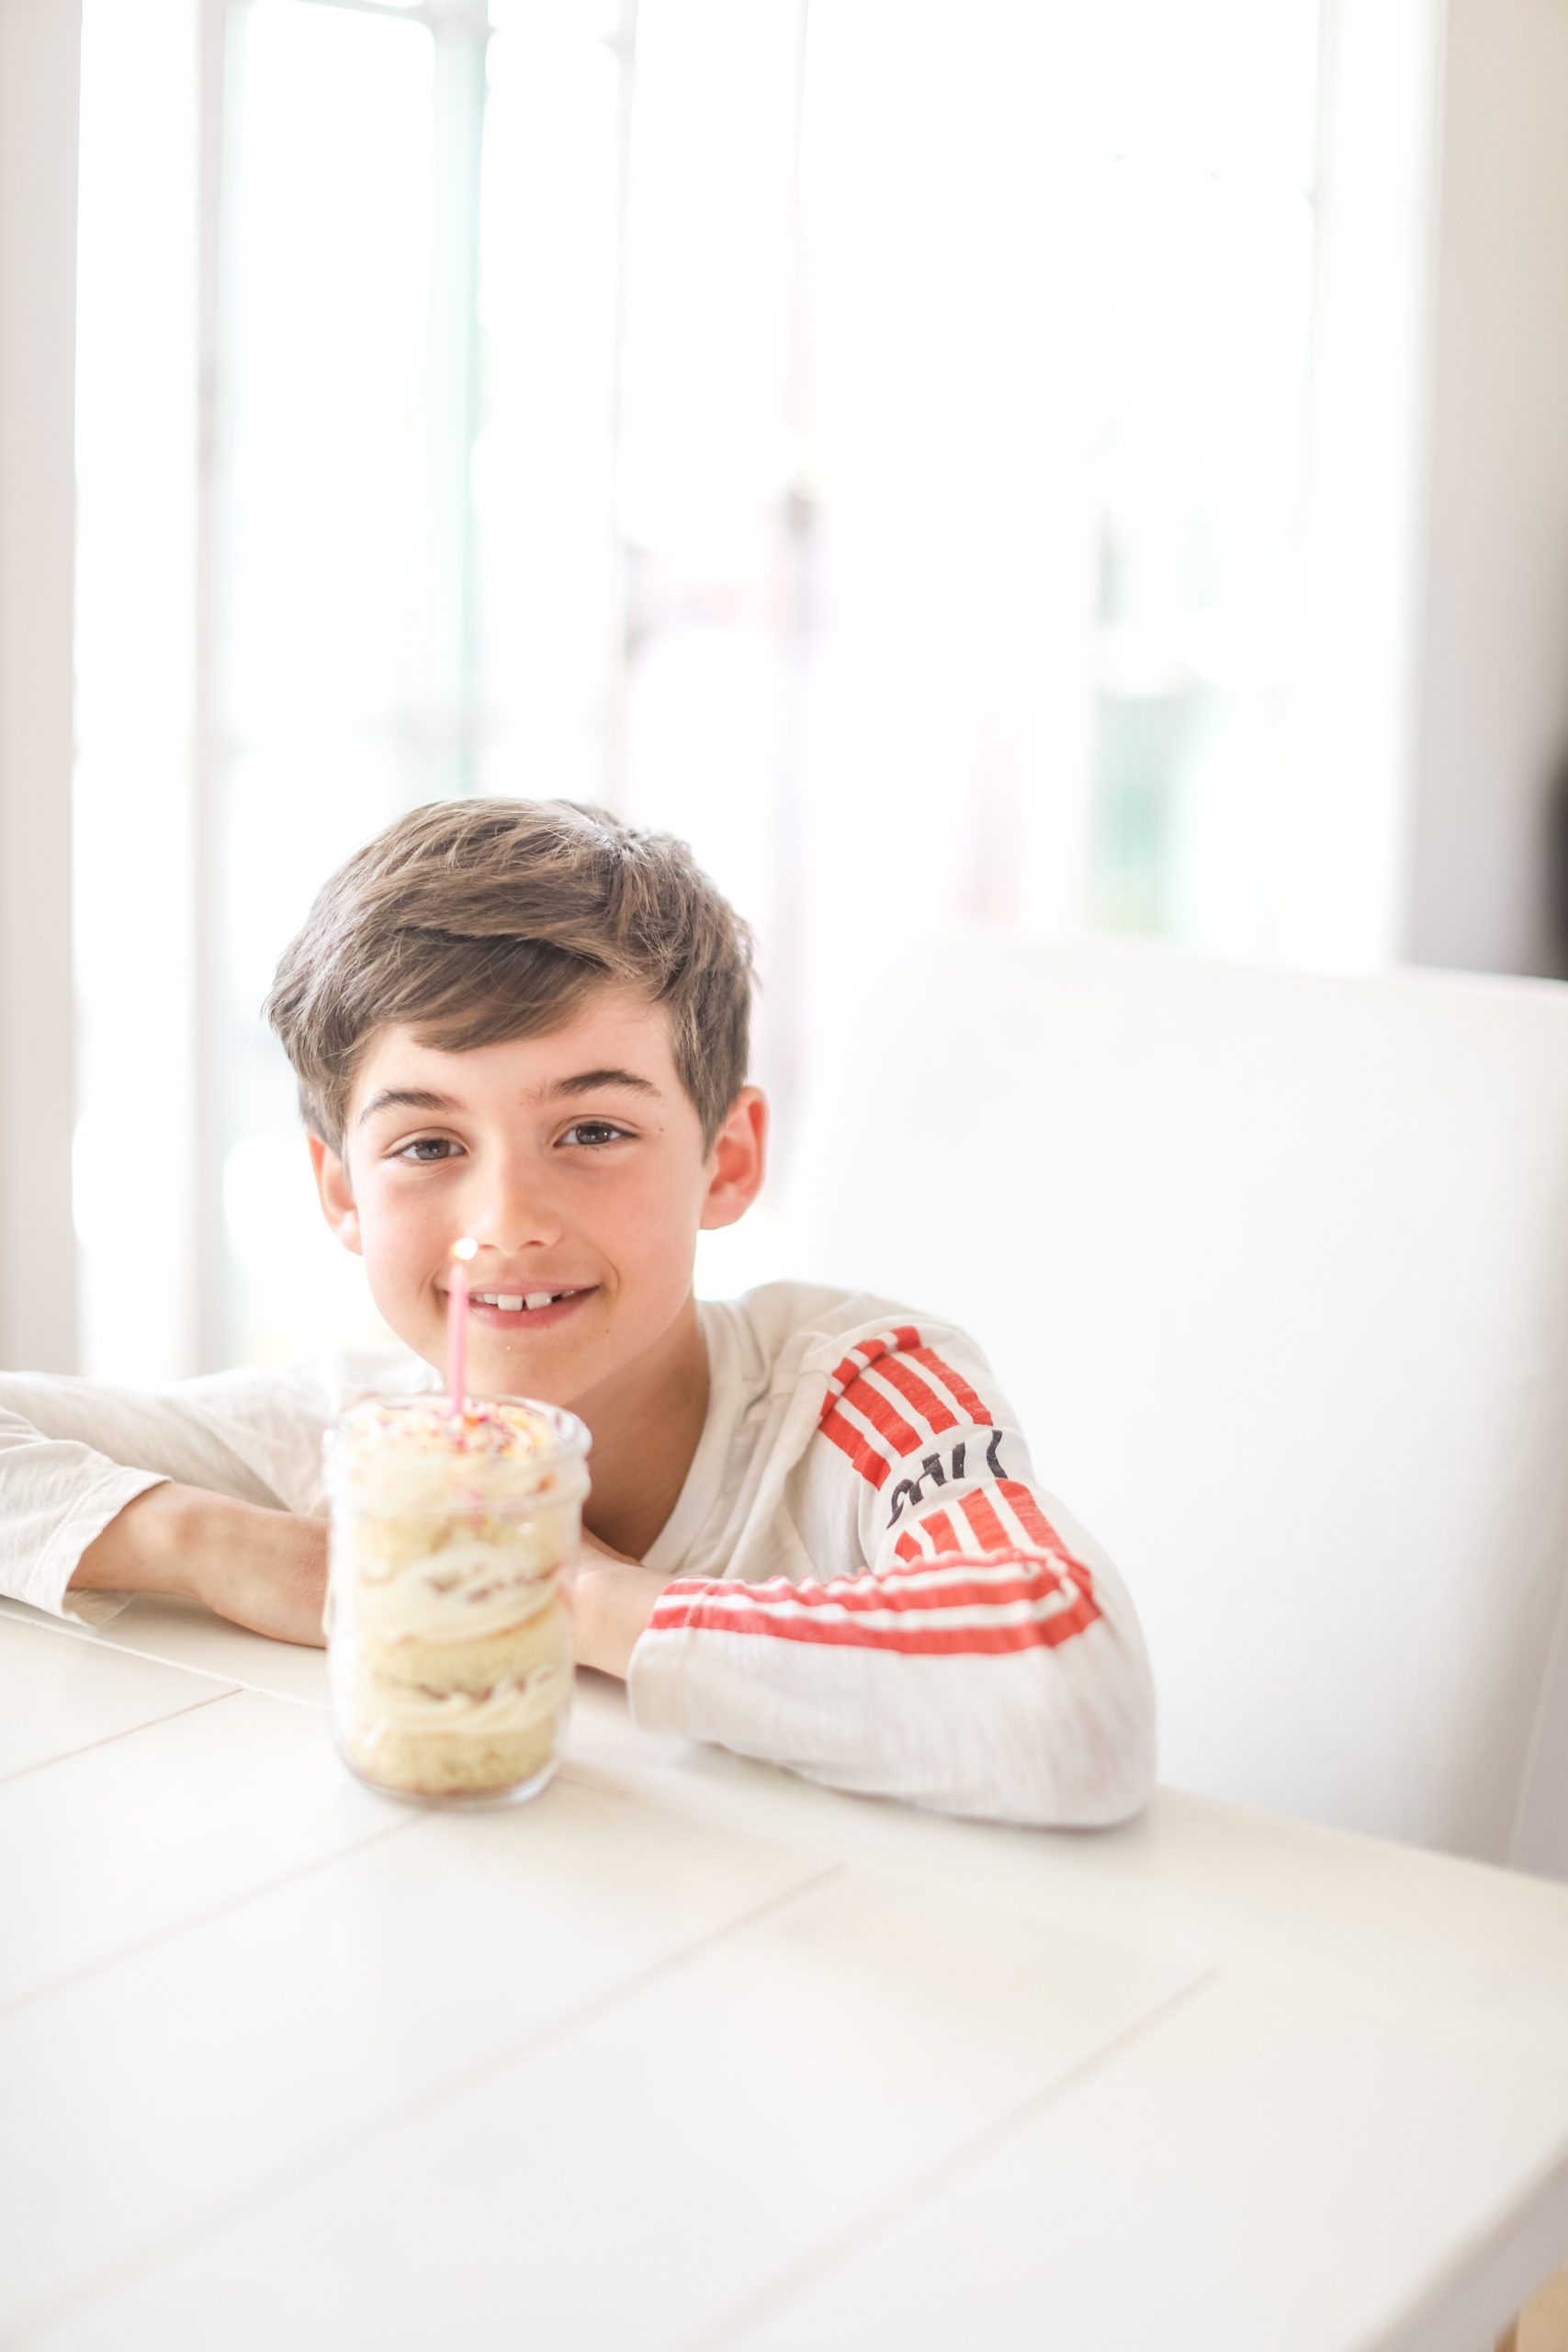 Boy smiling with birthday cake in a jar and candle